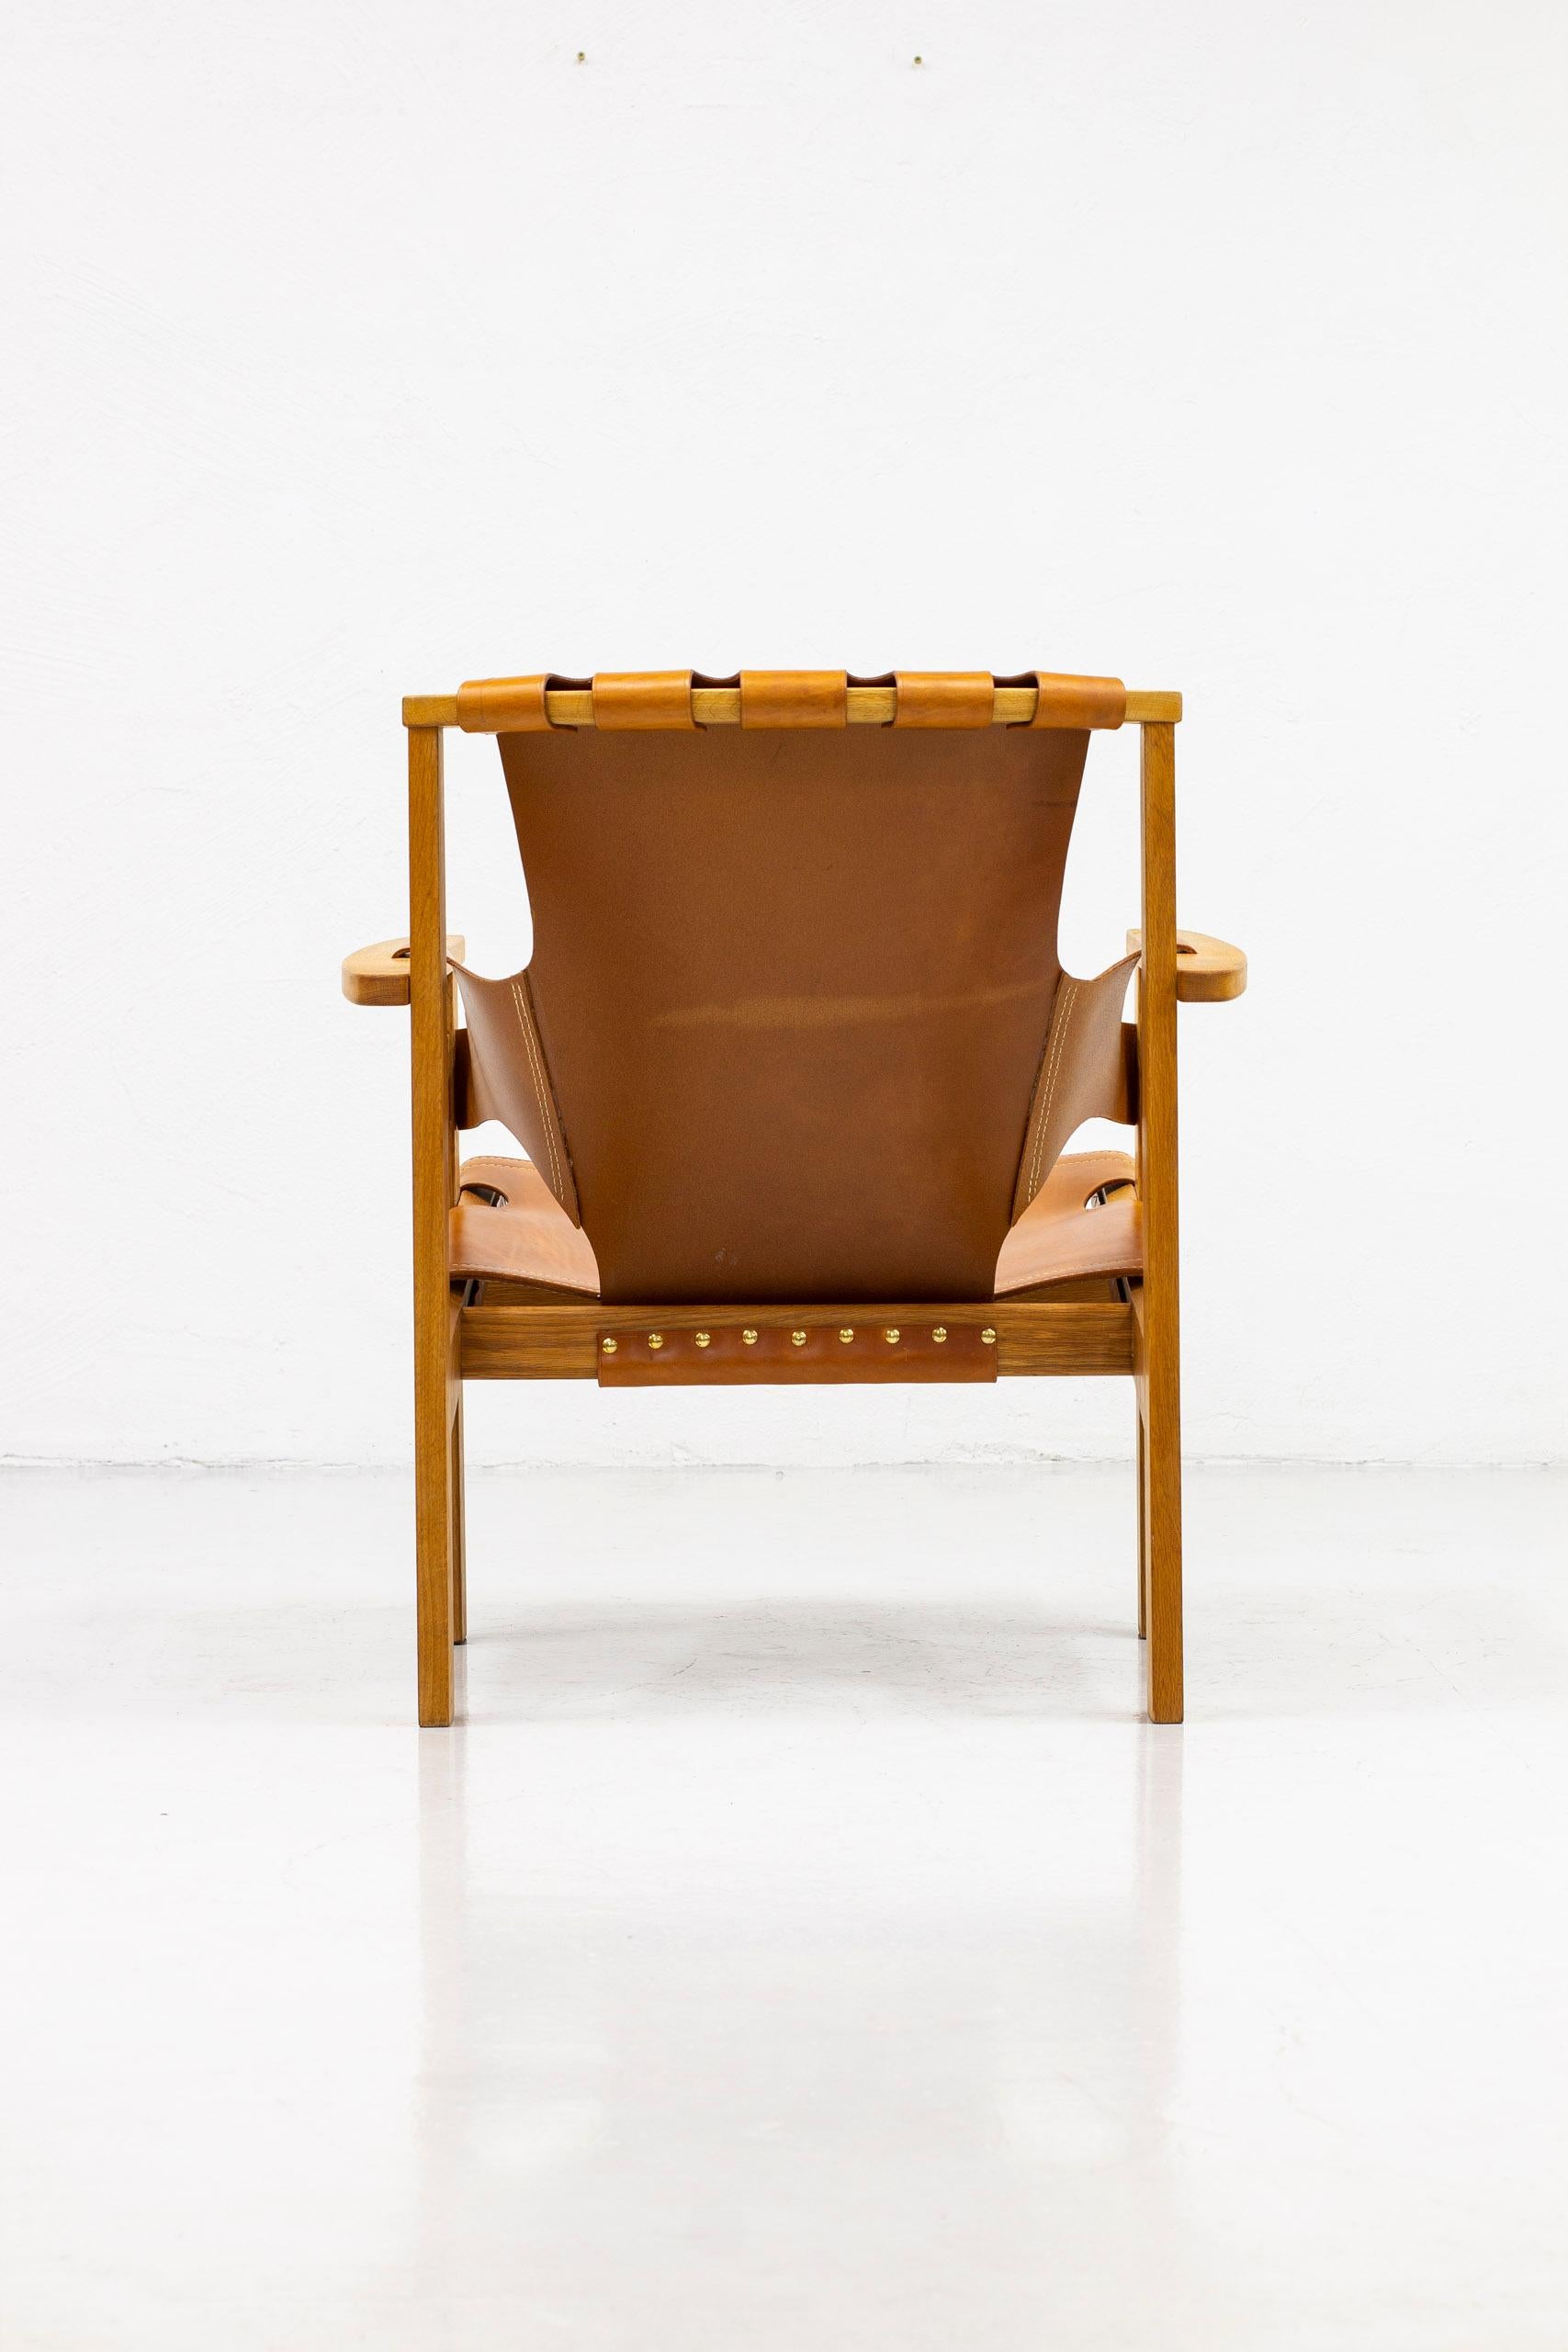 Lounge Chairs in Oak and Leather by Carl-Axel Acking, Nk, Nordiska Kompaniet 11